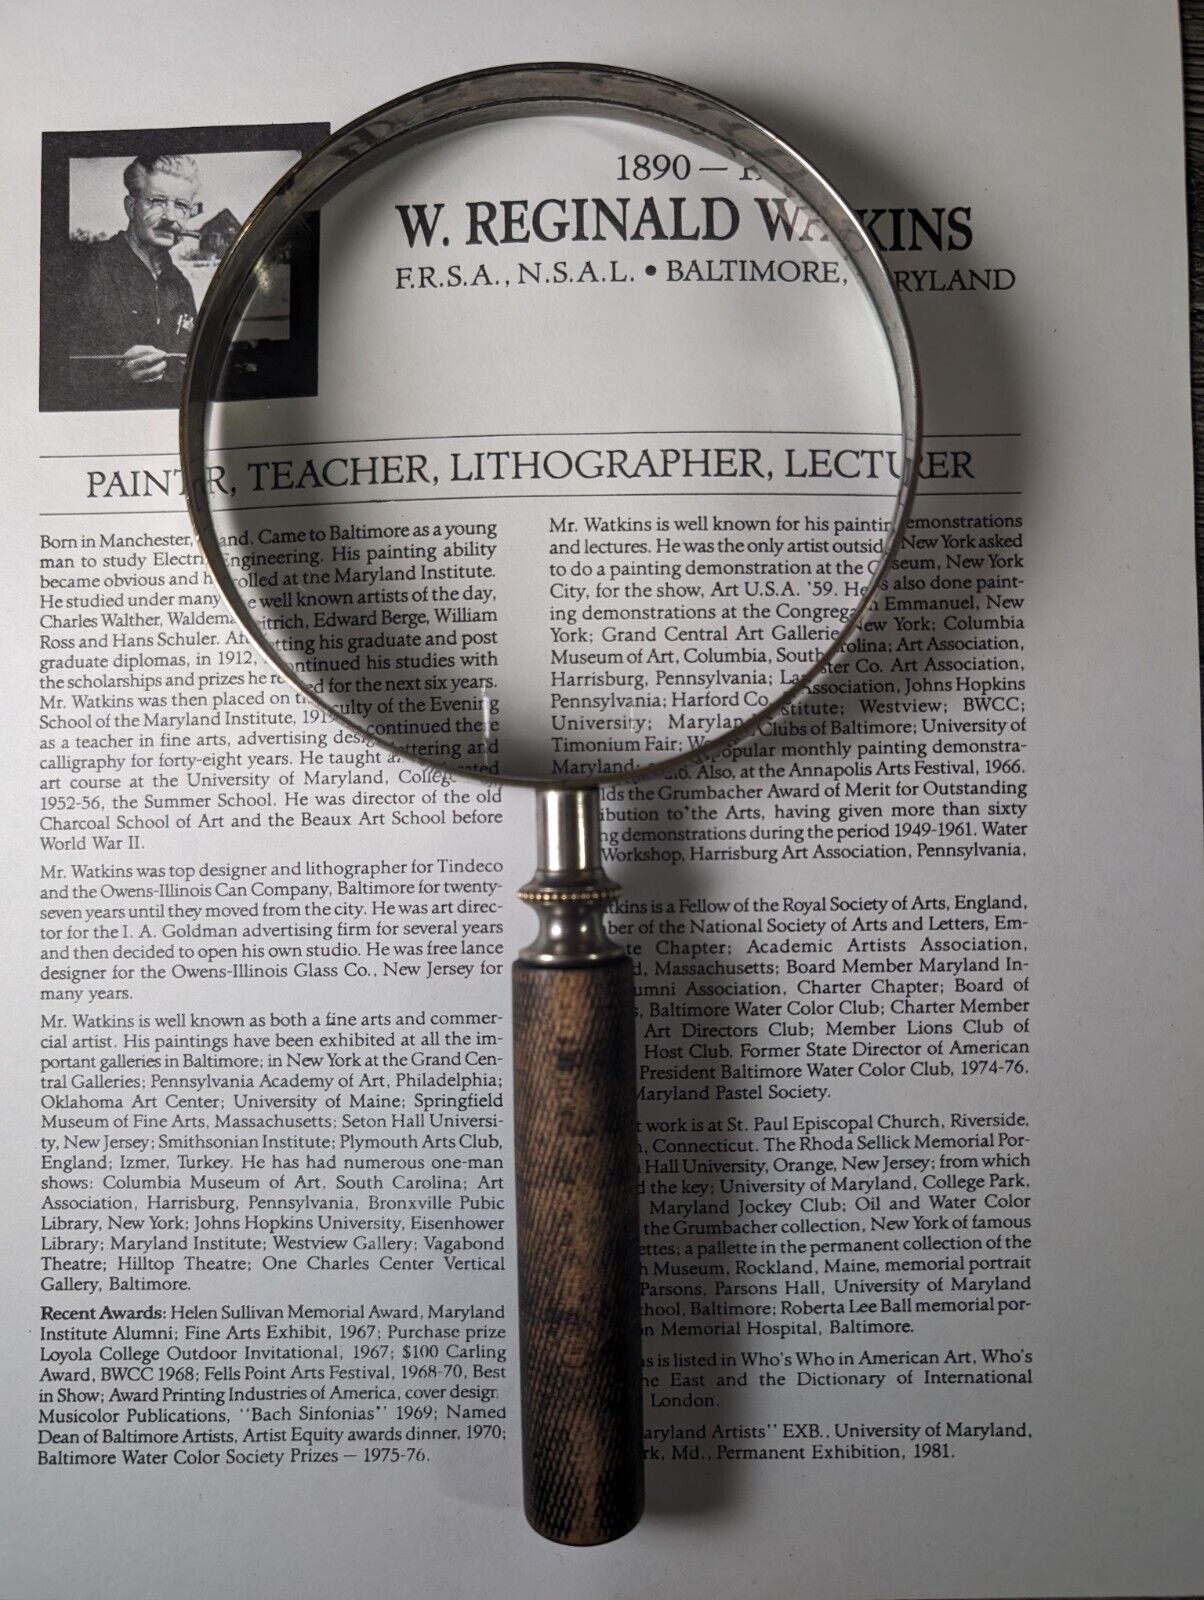 Antique VTG B & L.O. Co Bausch & Lomb Co. Magnifying Glass Metal w Wood Handle